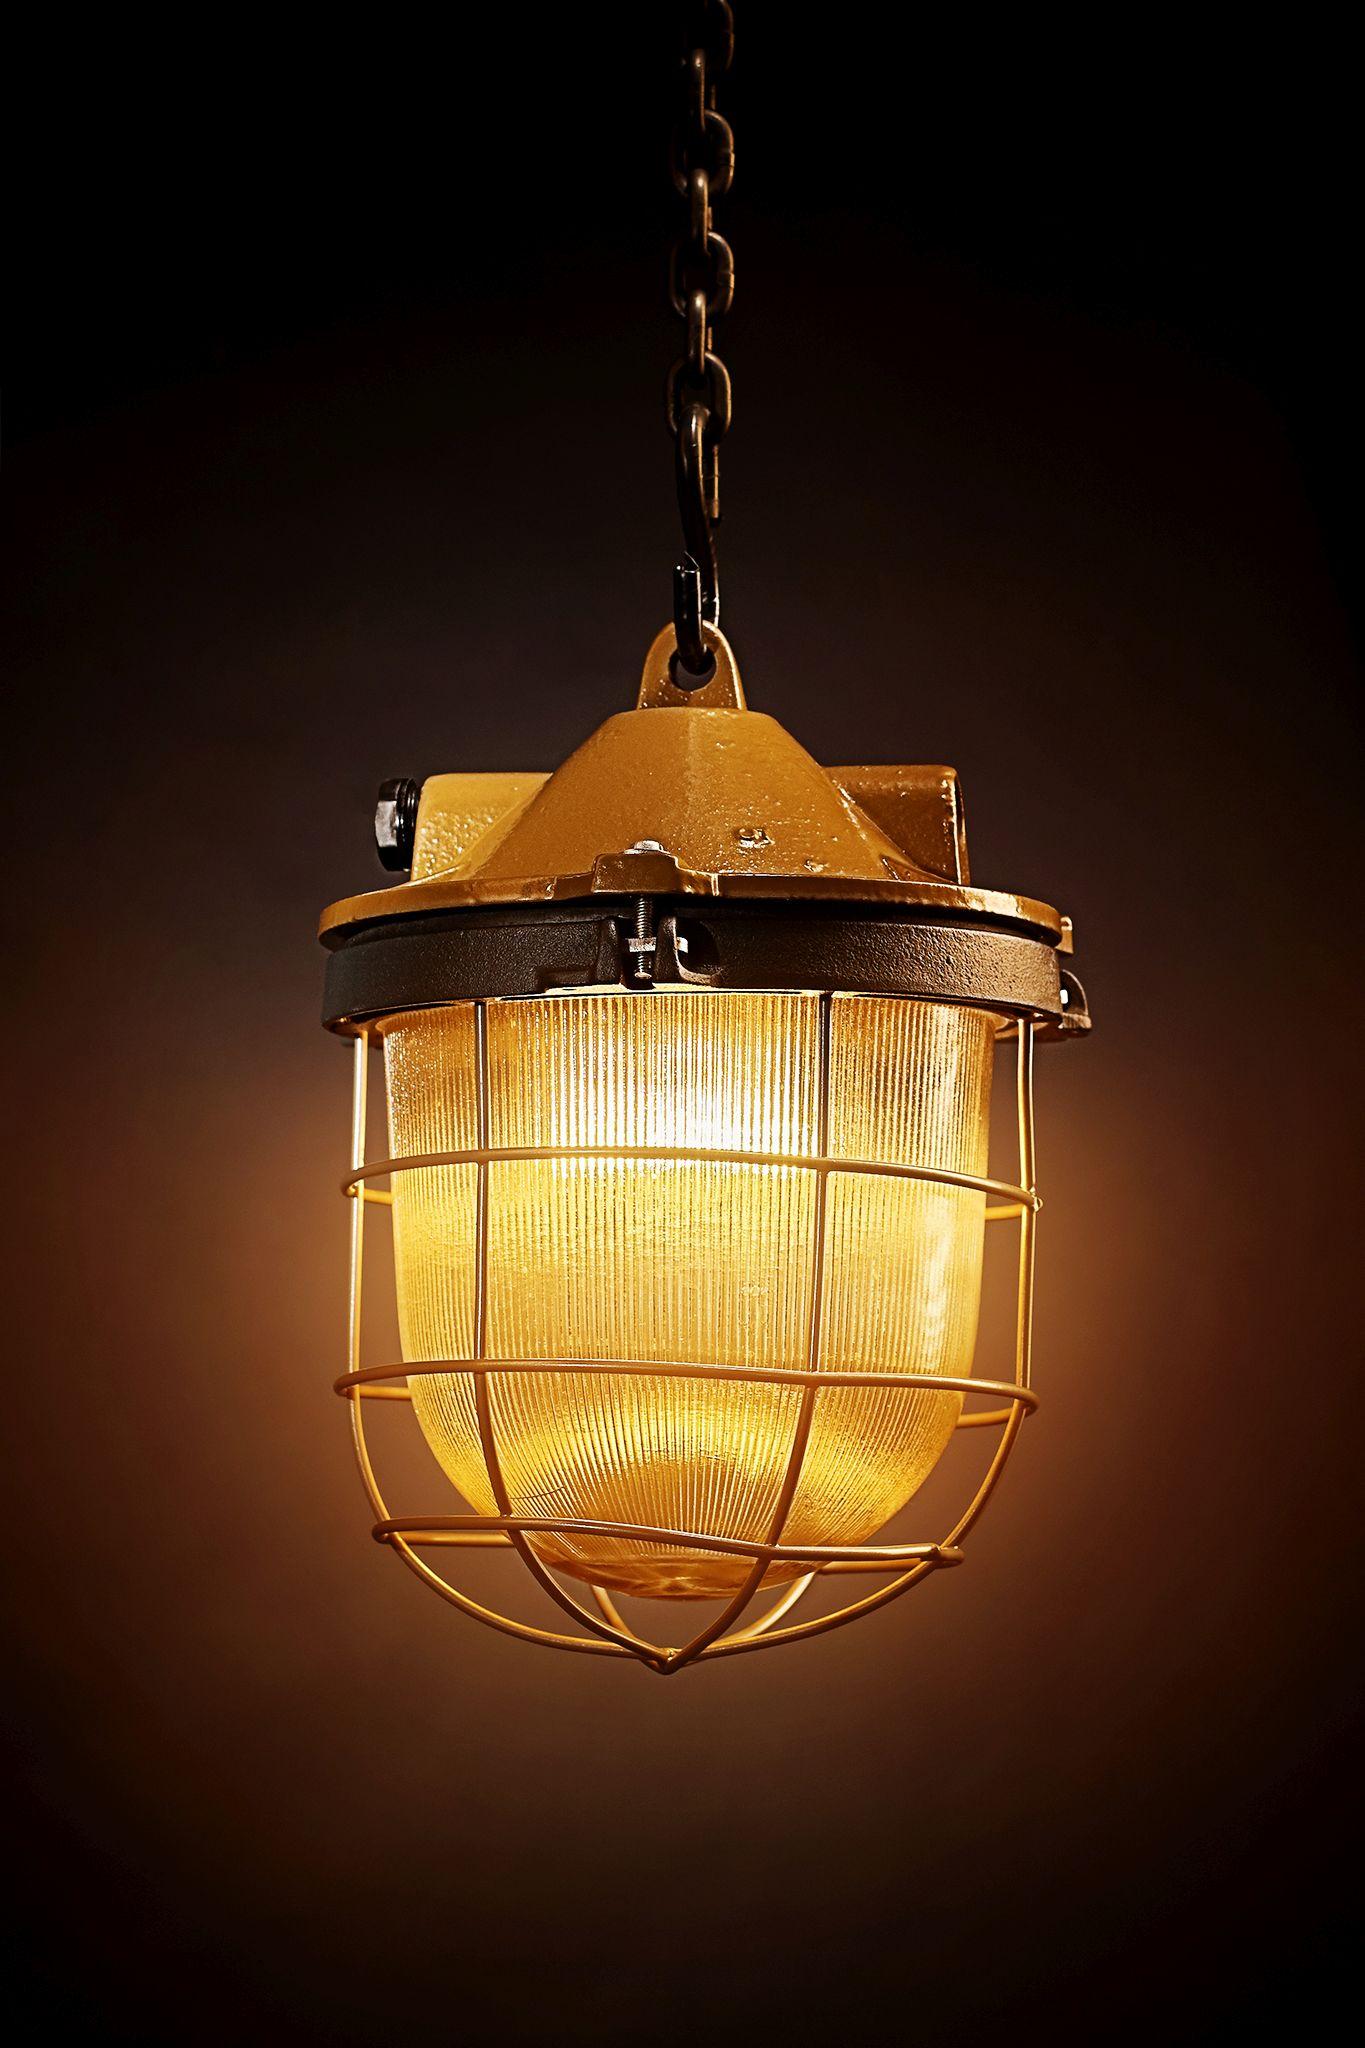 Primary use:
Hanging cast iron lamp OKS-1 used to illuminate factory and workshop spaces, where there was dustiness and a chance for a mechanical damage.
Manufacturer: Lighting Equipment Factory ZAOS in Wilkasy near Gizycko
Time period: